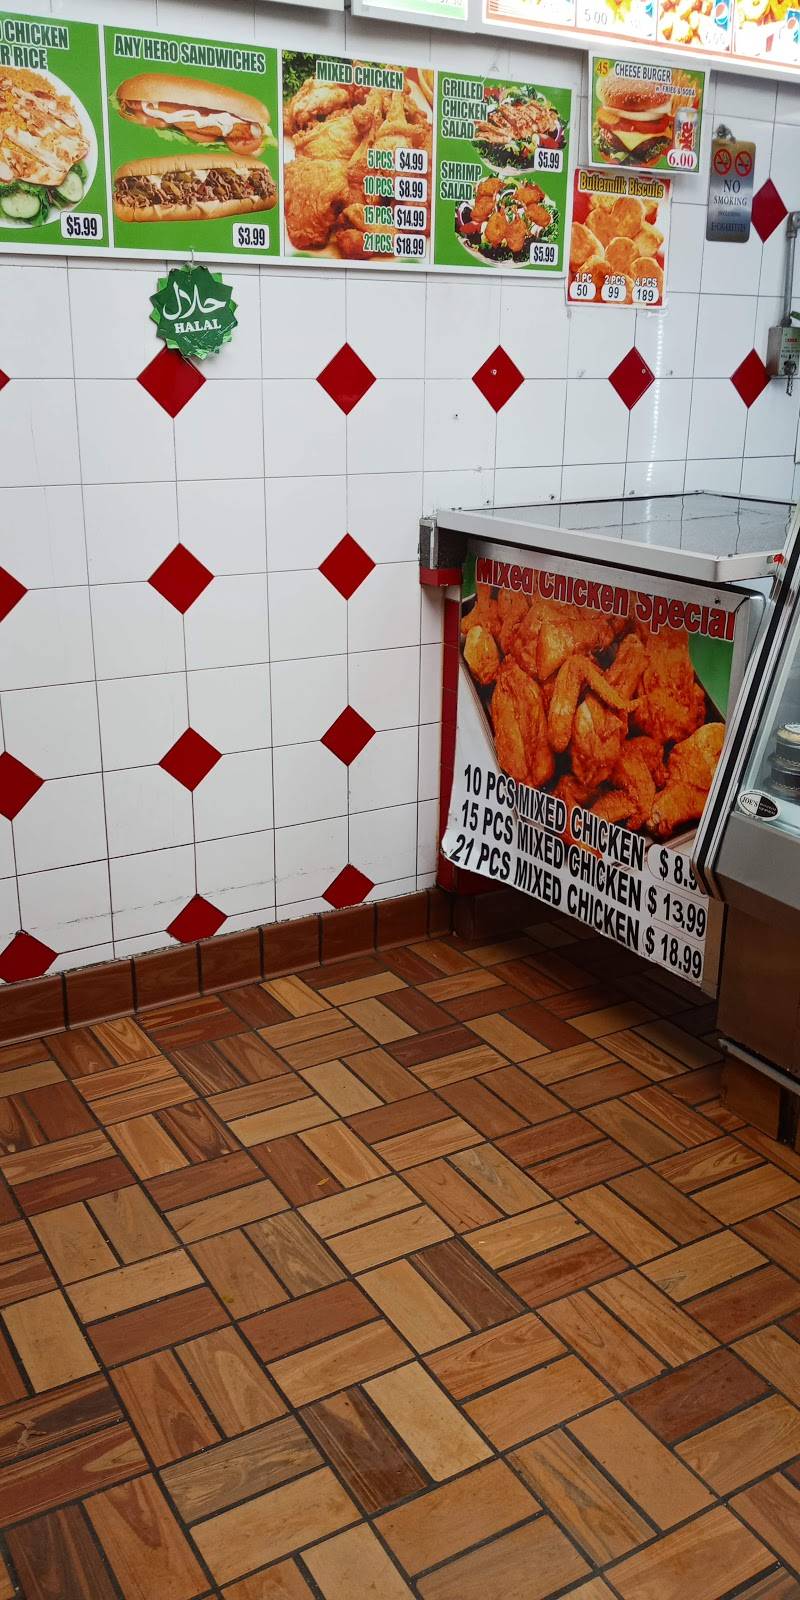 Crown Fried Chicken | restaurant | 3633 Broadway, New York, NY 10031, USA | 2124917288 OR +1 212-491-7288